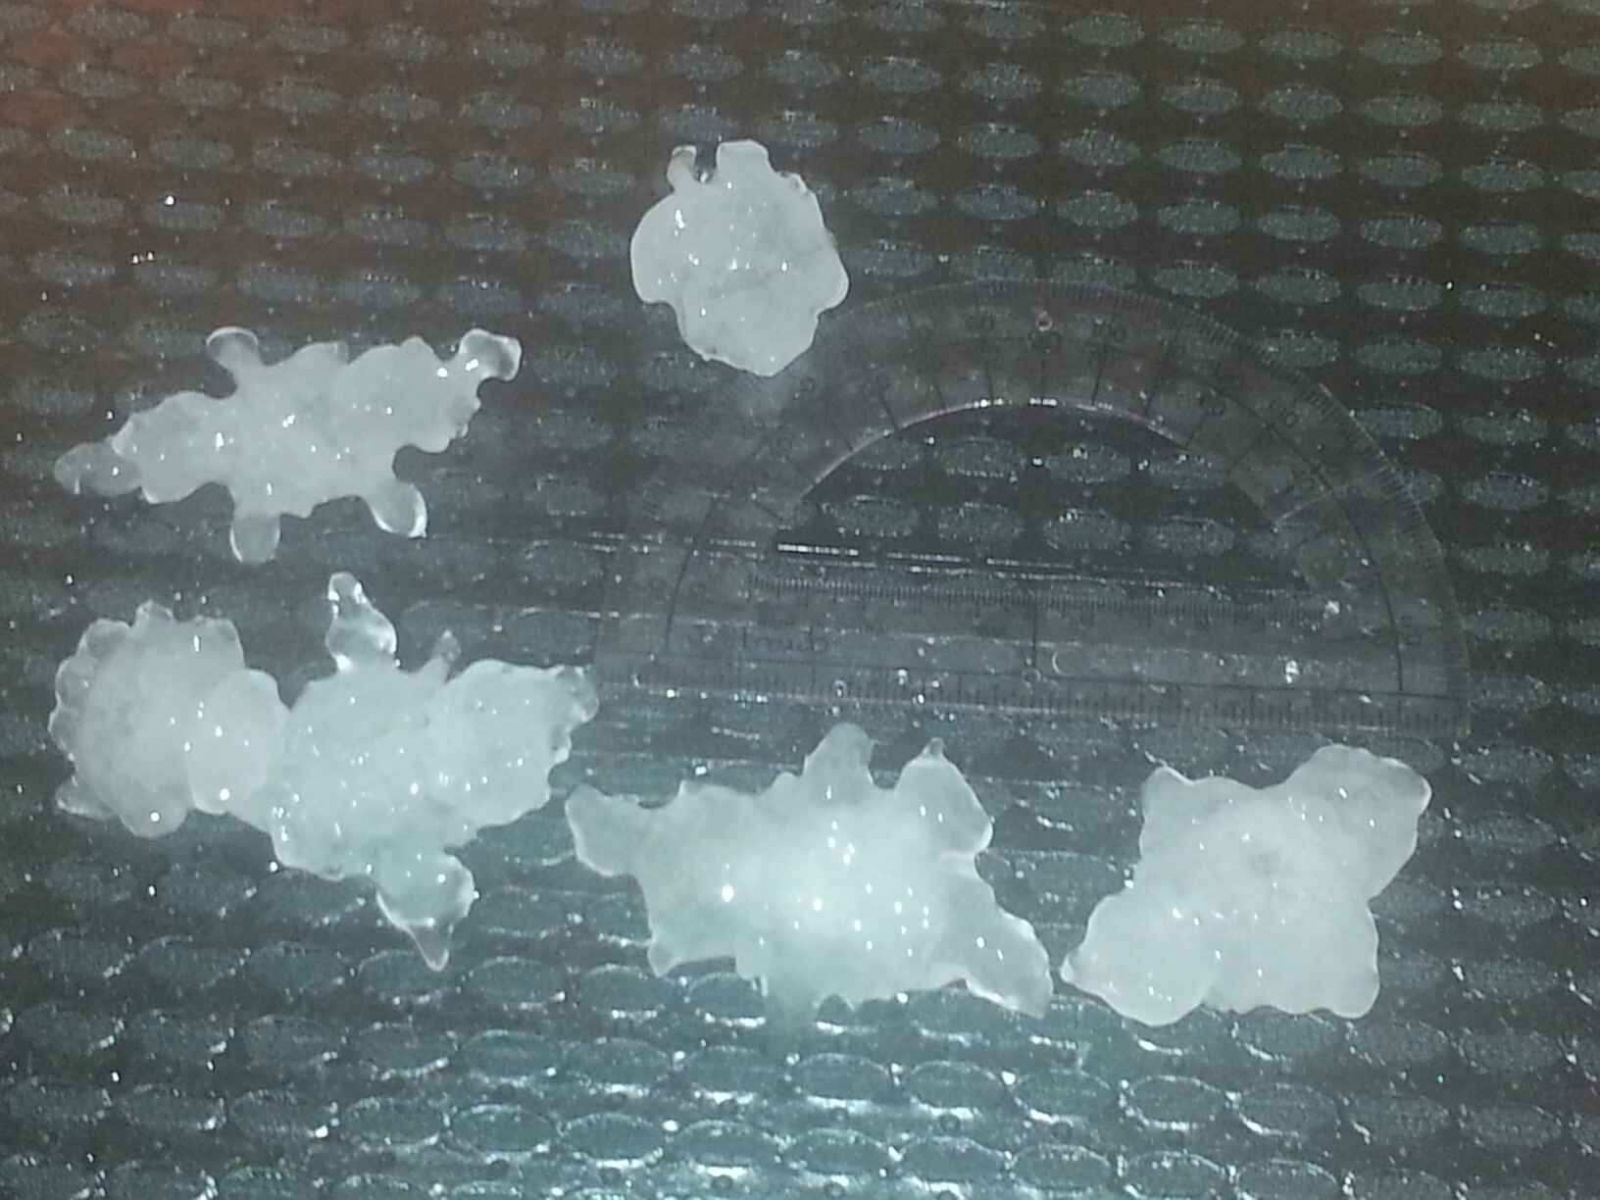 Large hail in Mahomet, IL April 9, 2015. Photo by Kristen Claybrooke.